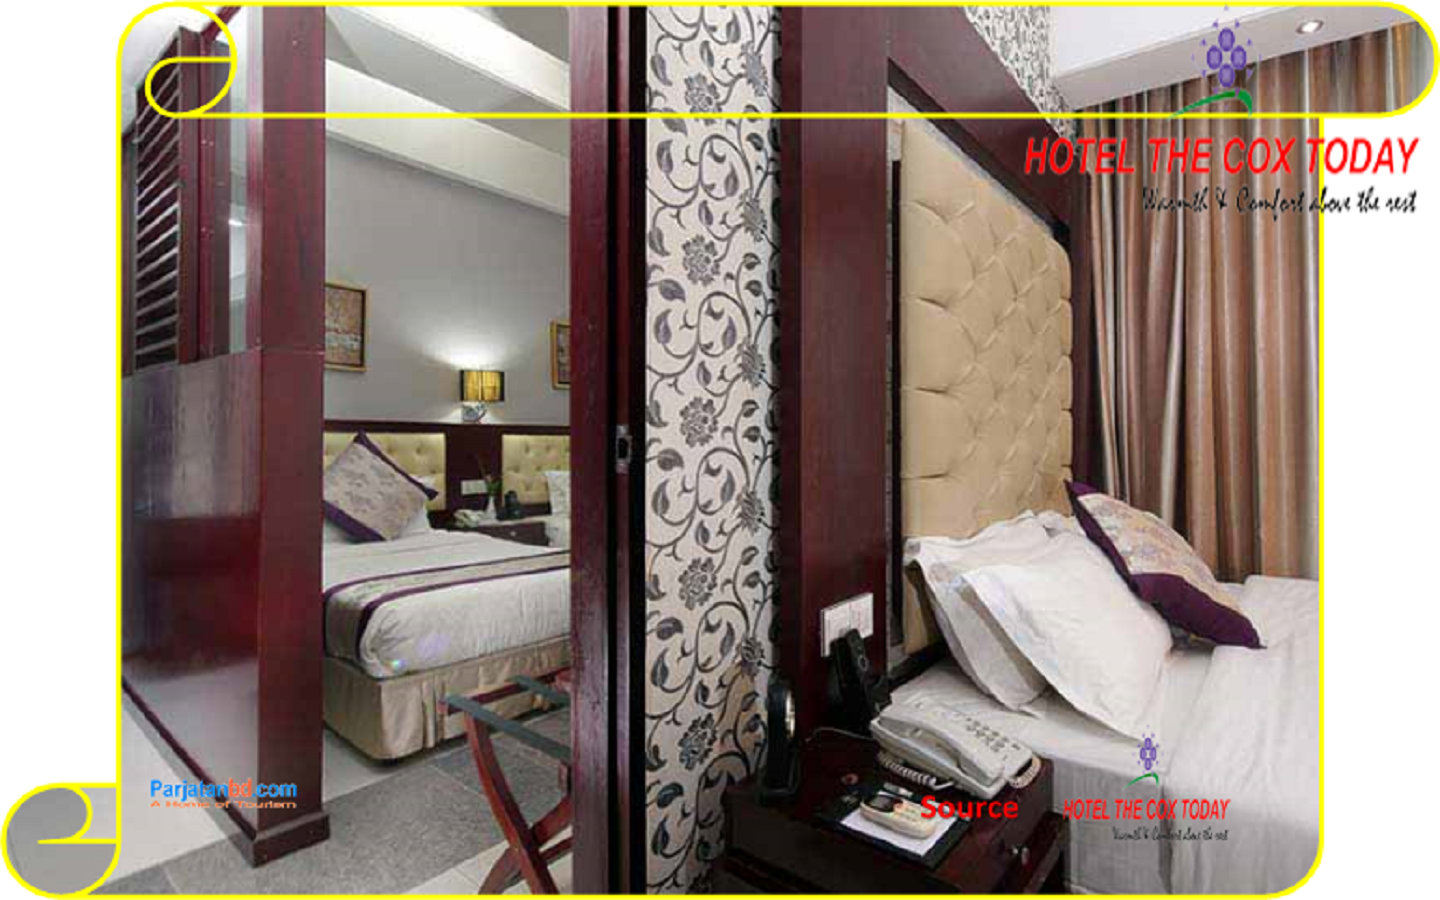 Room Family Suite  -1, Hotel The Cox Today, Coxs Bazar